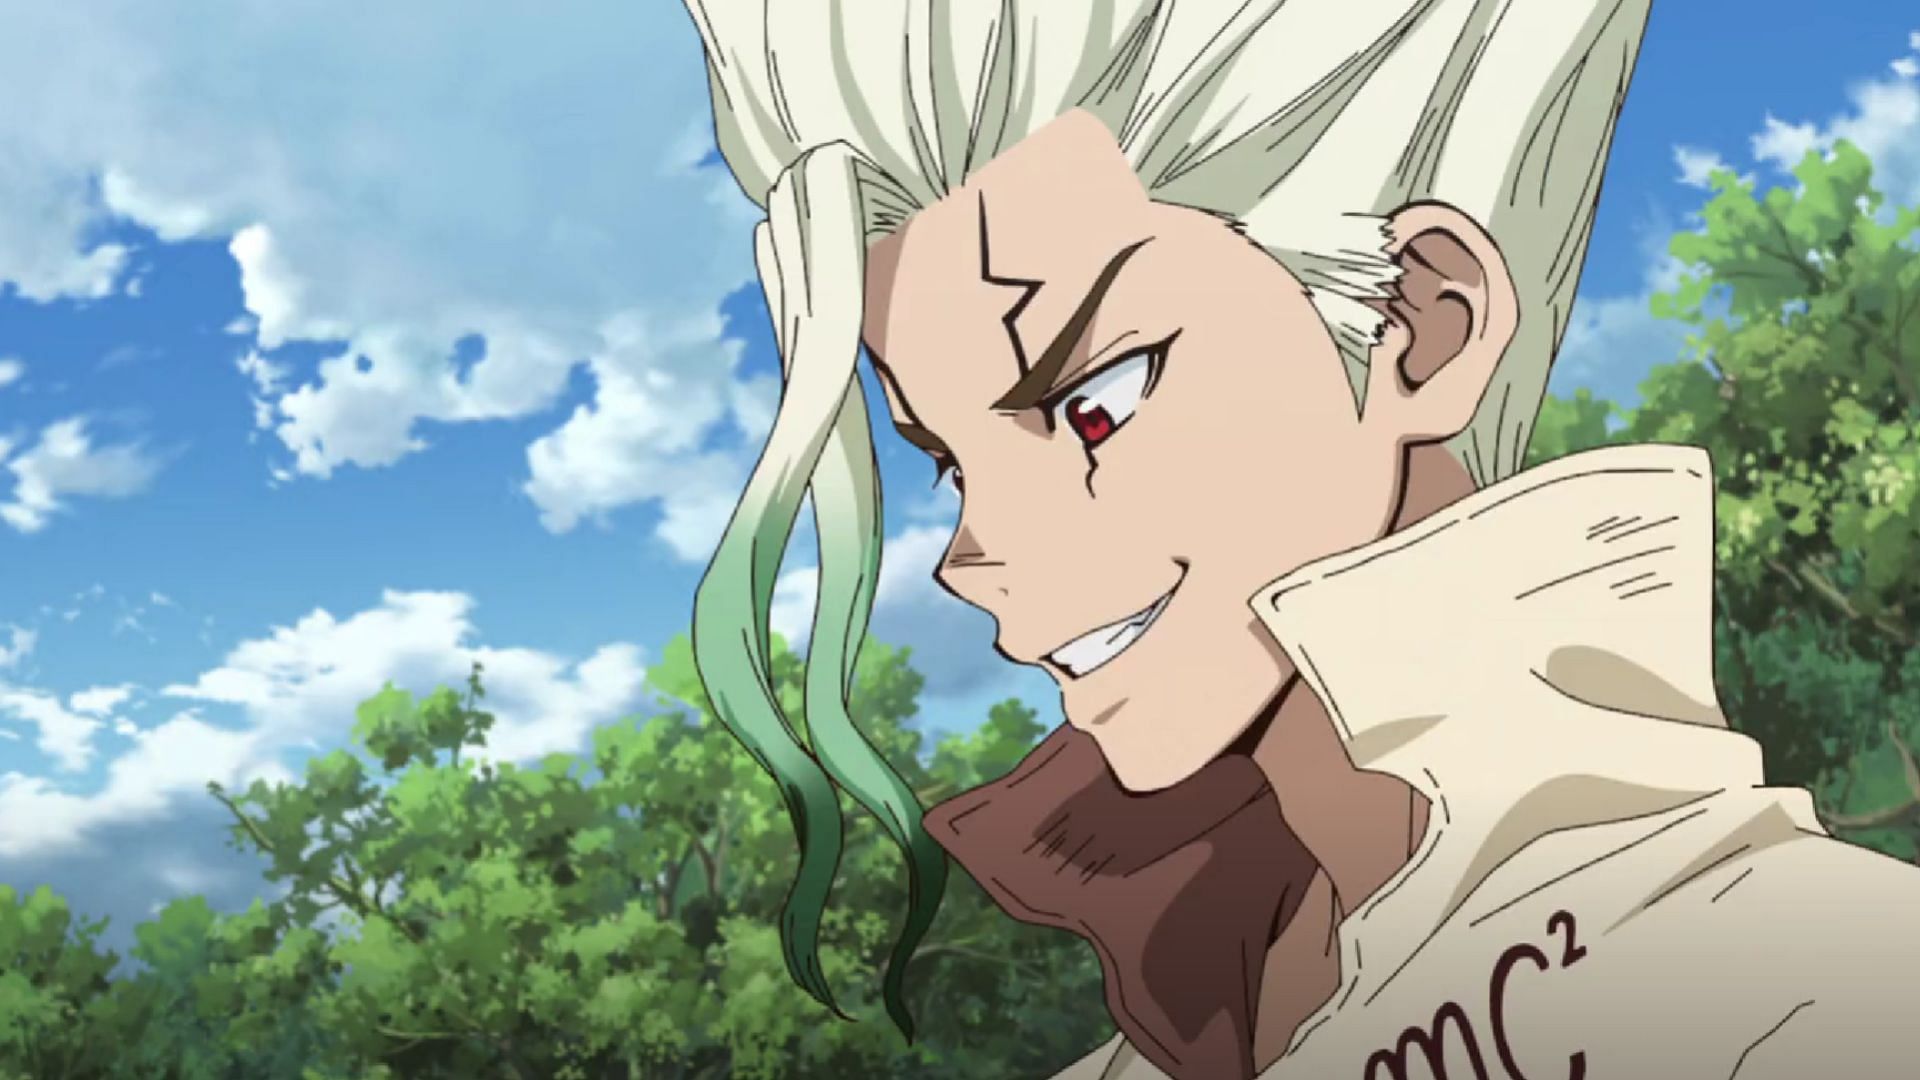 Dr. Stone Season 3 Episode 20 Release Date and Predictions